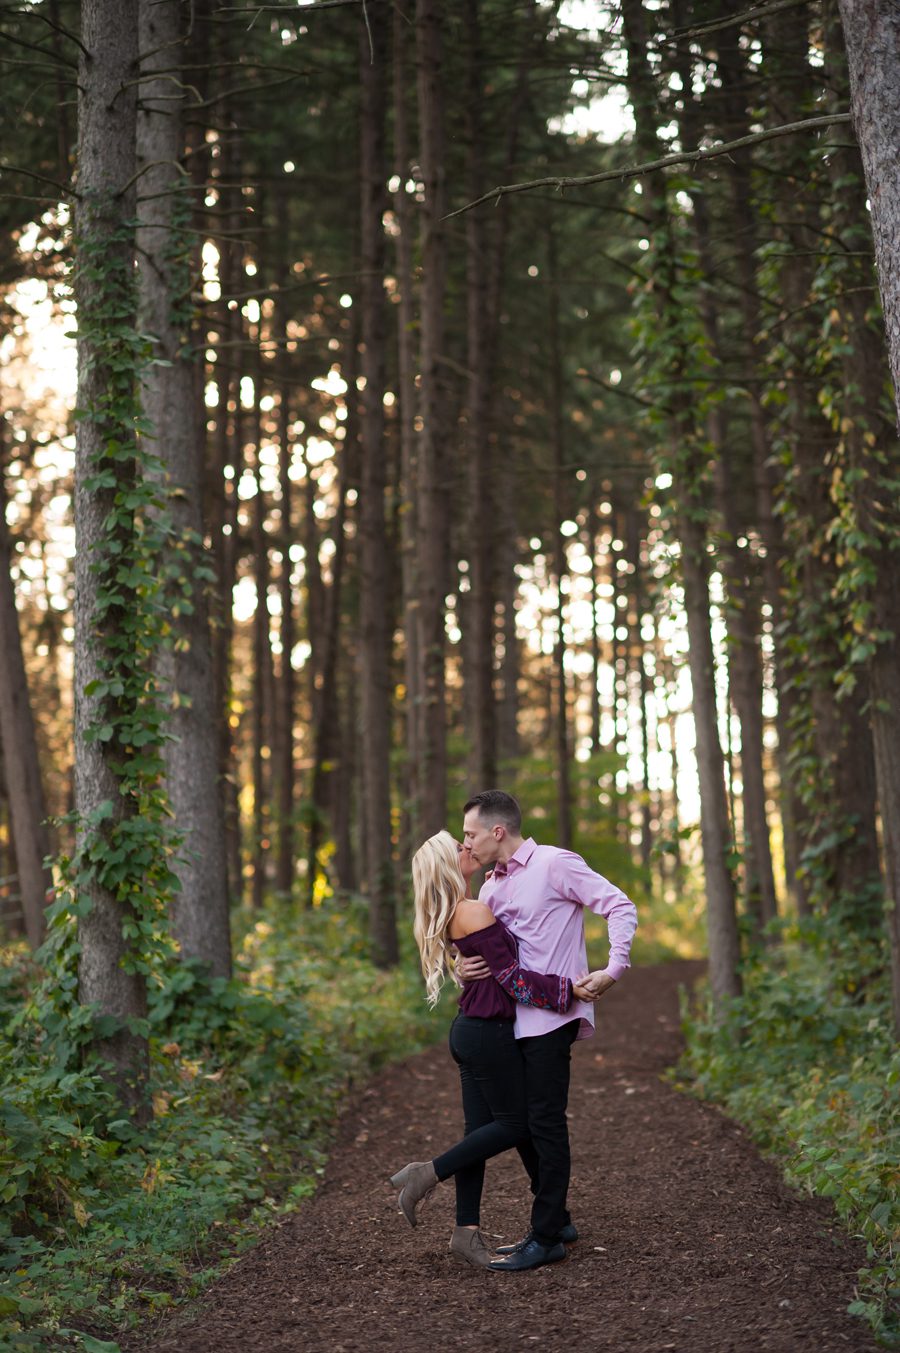 Engagement photography session at the Morton Arboretum in Lisle